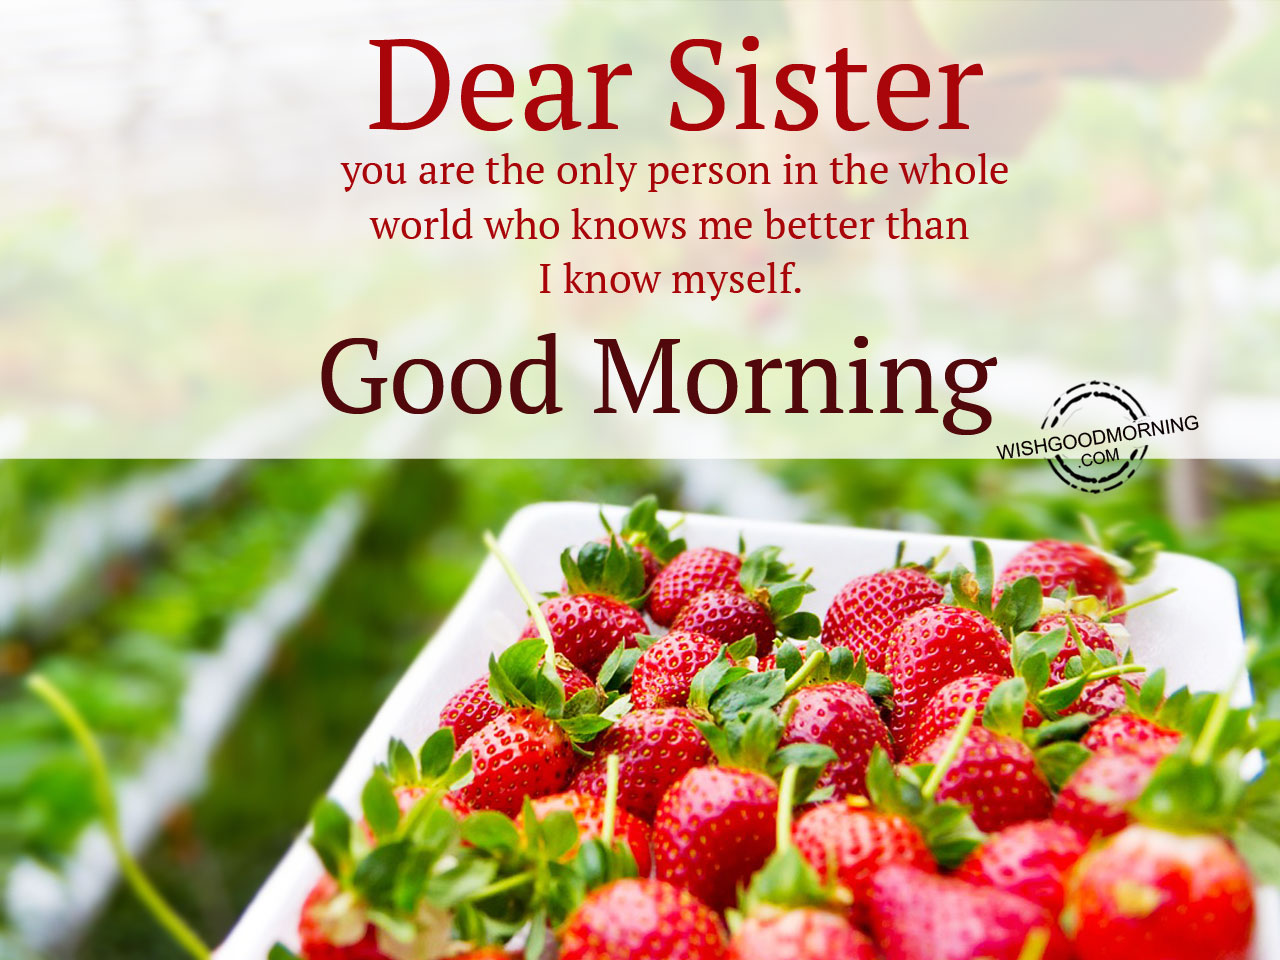 a href="https://www.wishgoodmorning.com/good-morning-wishes-for-sister/dear-...